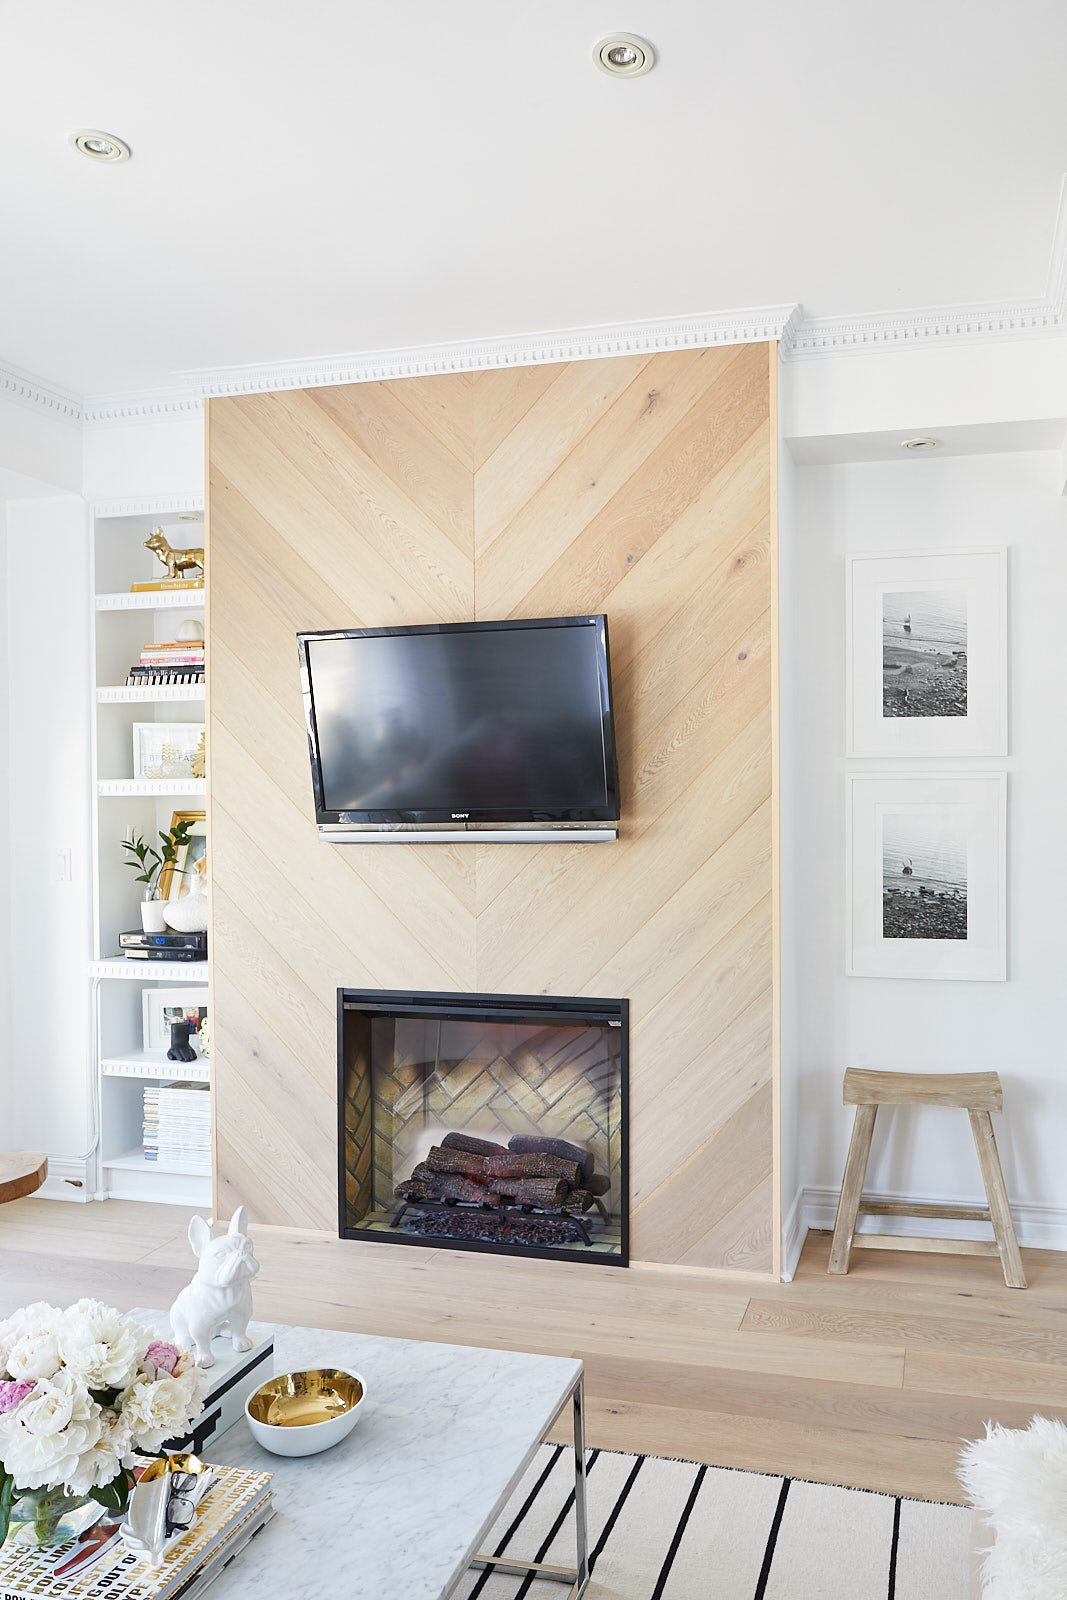 Fireplace wall with TV above